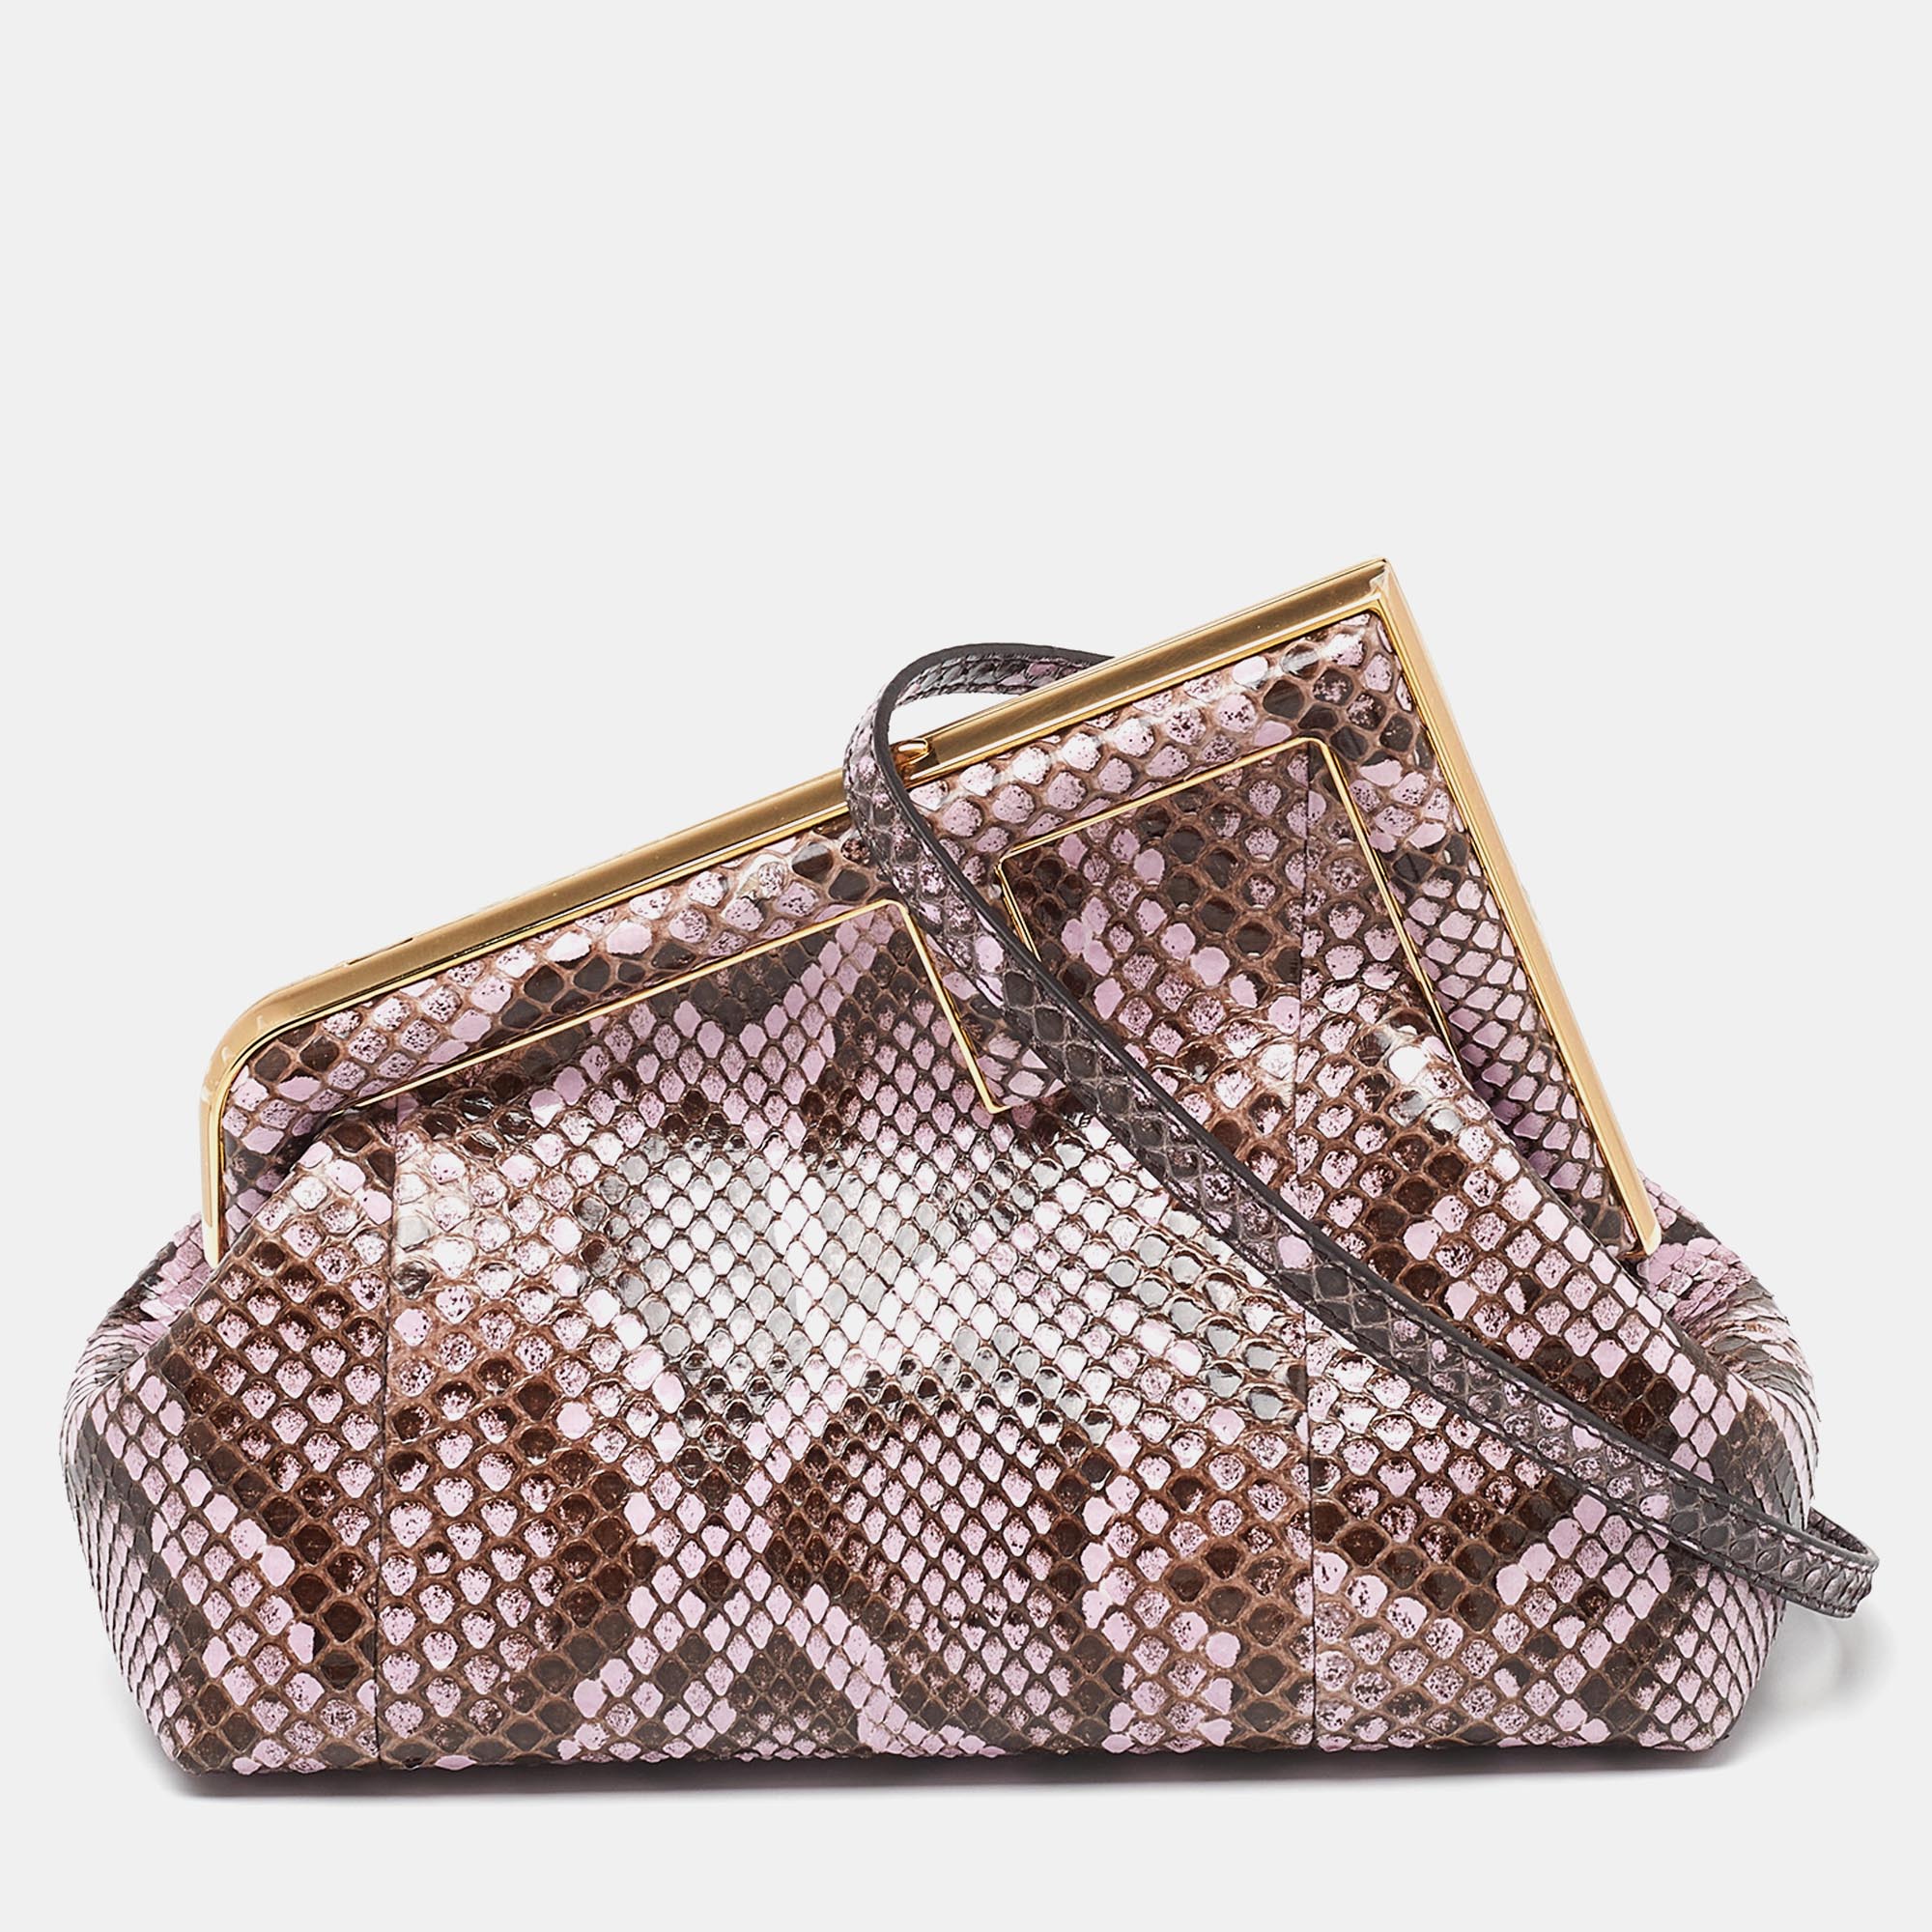 Fendi pink/brown python and leather small first clutch